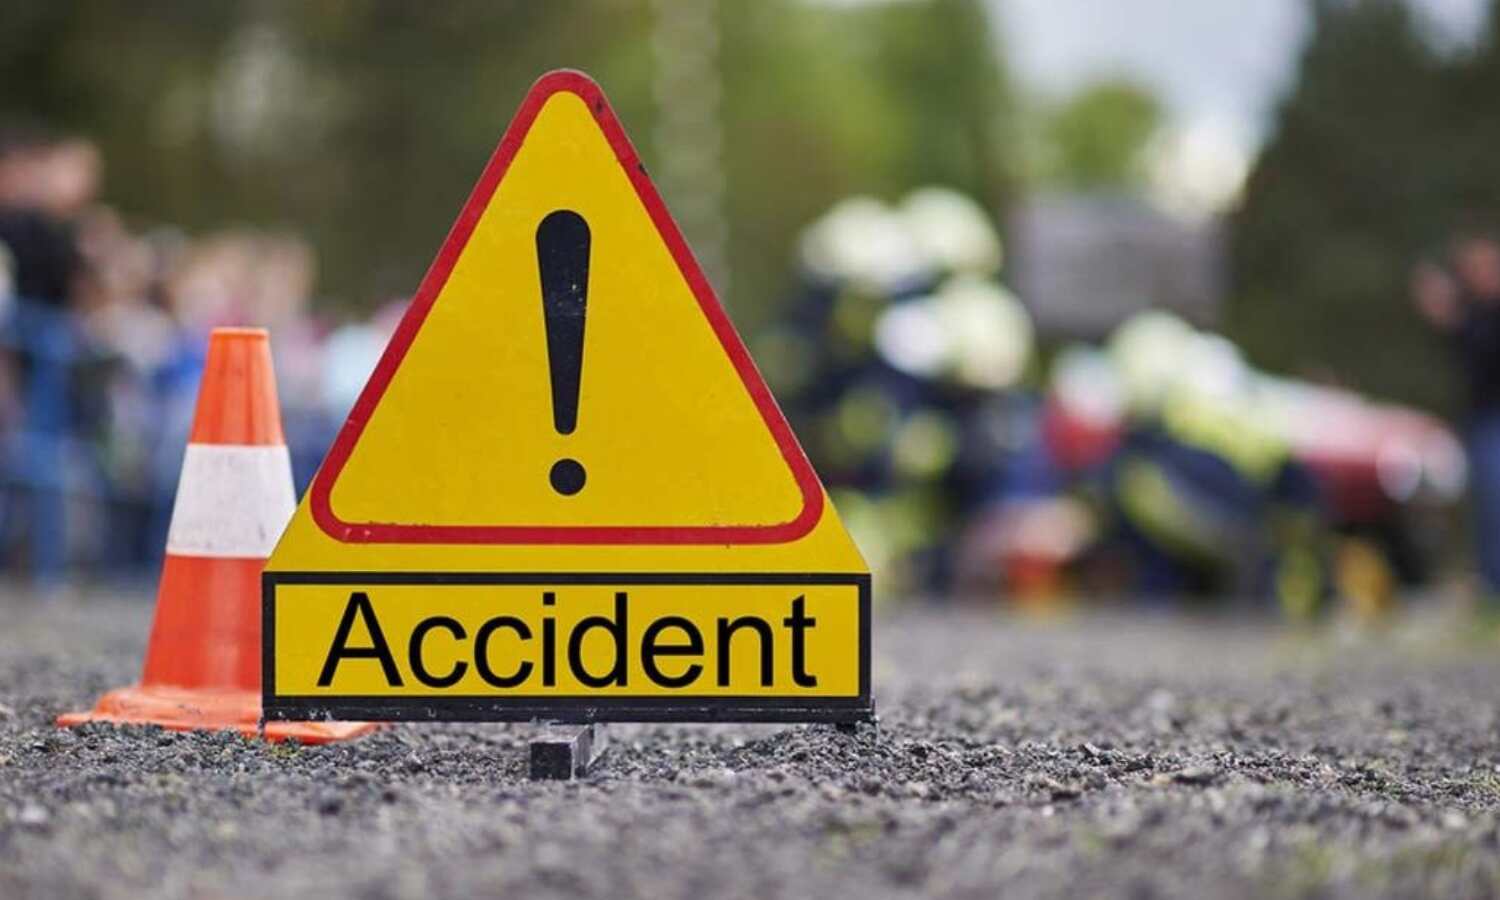 28-year-old doctor killed in car accident in Odisha